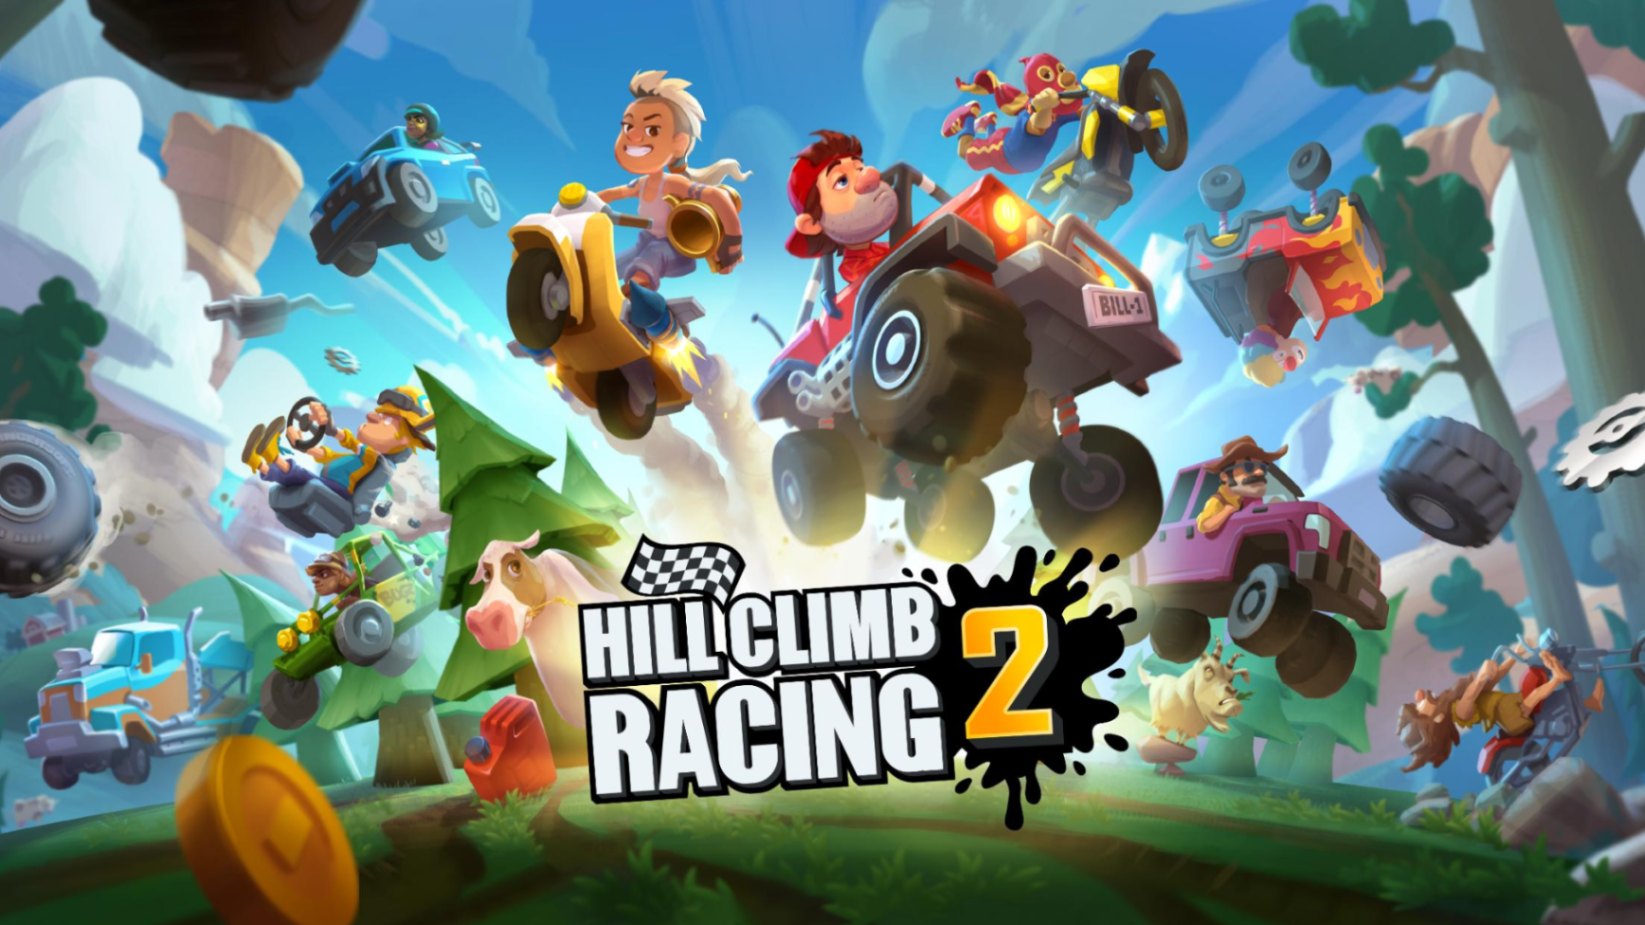 See How To Get Diamonds On Hill Climb Racing 2